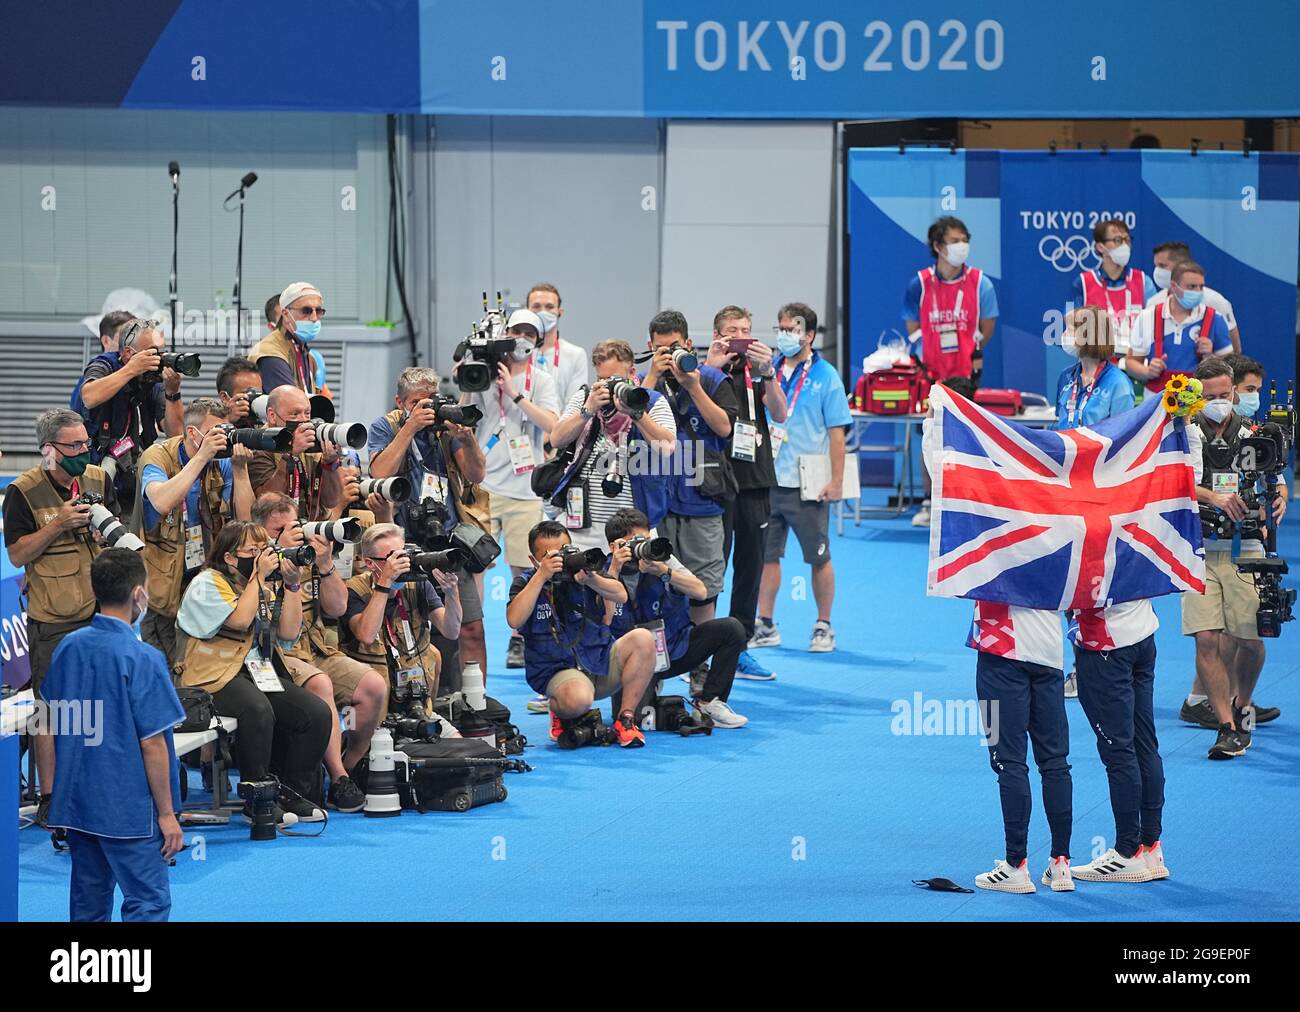 Tokio, Japan. 26th July, 2021. Swimming: Olympics, preliminary competition, water diving - synchronised diving 10m, men at Tokyo Aquatics Centre. First-placed Thomas Daley and Matty Lee of Great Britain celebrate with a British flag after the competition. Credit: Michael Kappeler/dpa/Alamy Live News Stock Photo